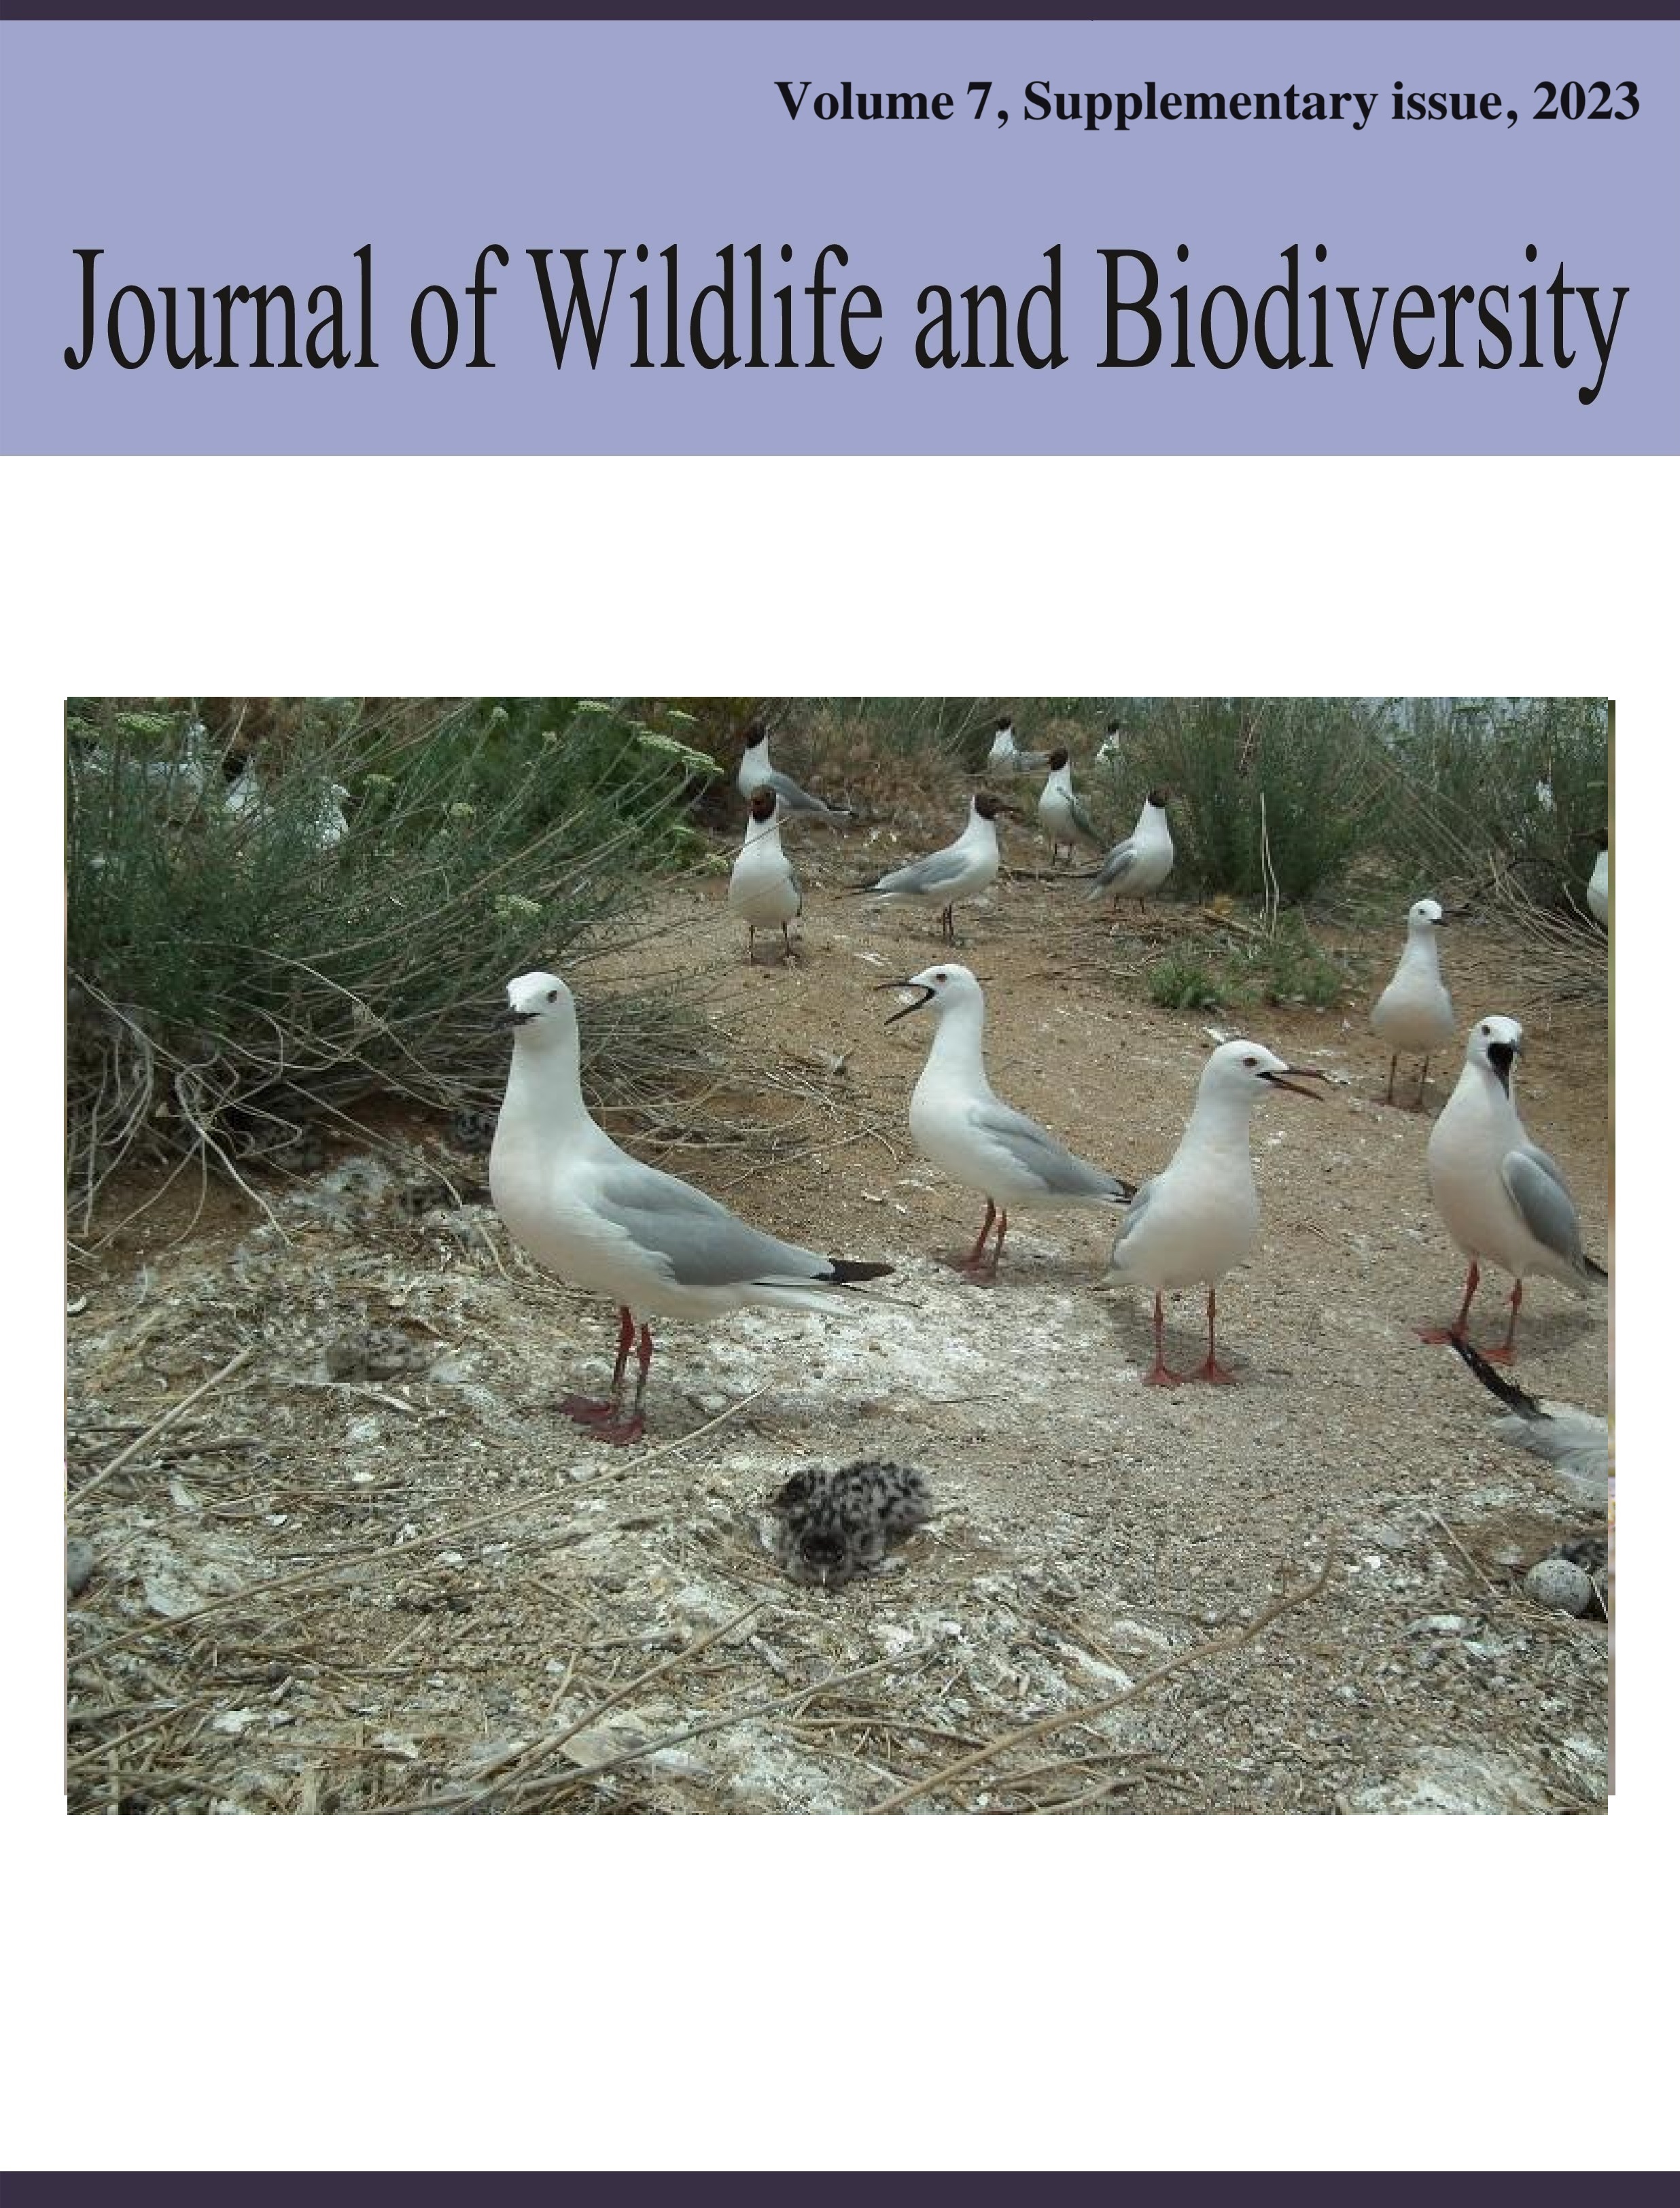 					View Vol. 7 No. supplementary issue (2023): Journal of Wildlife and Biodiversity
				